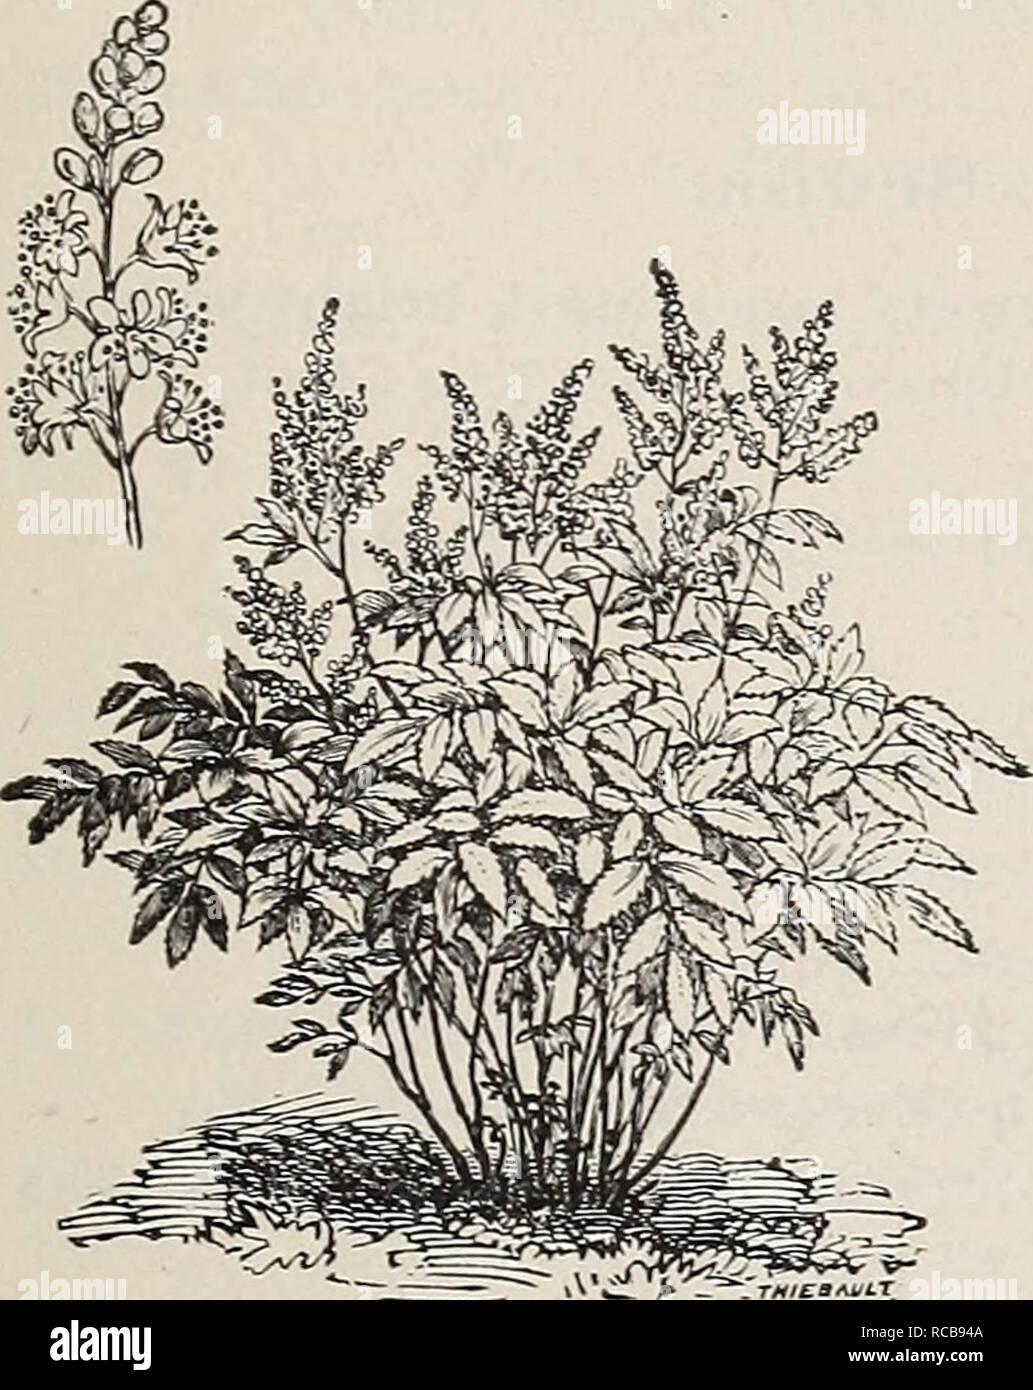 . Ellwanger &amp; Barry's general catalogue : Mount Hope nurseries. GENERAL CATALOGUE. 117 ASTILBE. Japan Spirsea. A. Japonica. Known generally as Spircea Japonica or Hoteia Japonica. A handsome plant, with small, pure white flowers, in large, branching panicles. Blooms in May, in the open air, but is cultivated chiefly for forcing in winter. 30c. var. grandiflora. (New.) Compared with the type, the individual flowers are much more numerous, and the flower spikes are larger, borne more freely and are more compact. See cut. 50c. AUBRETIA. Purple Rock-Cress. Valuable rock-plants. A. deltoidea. O Stock Photo